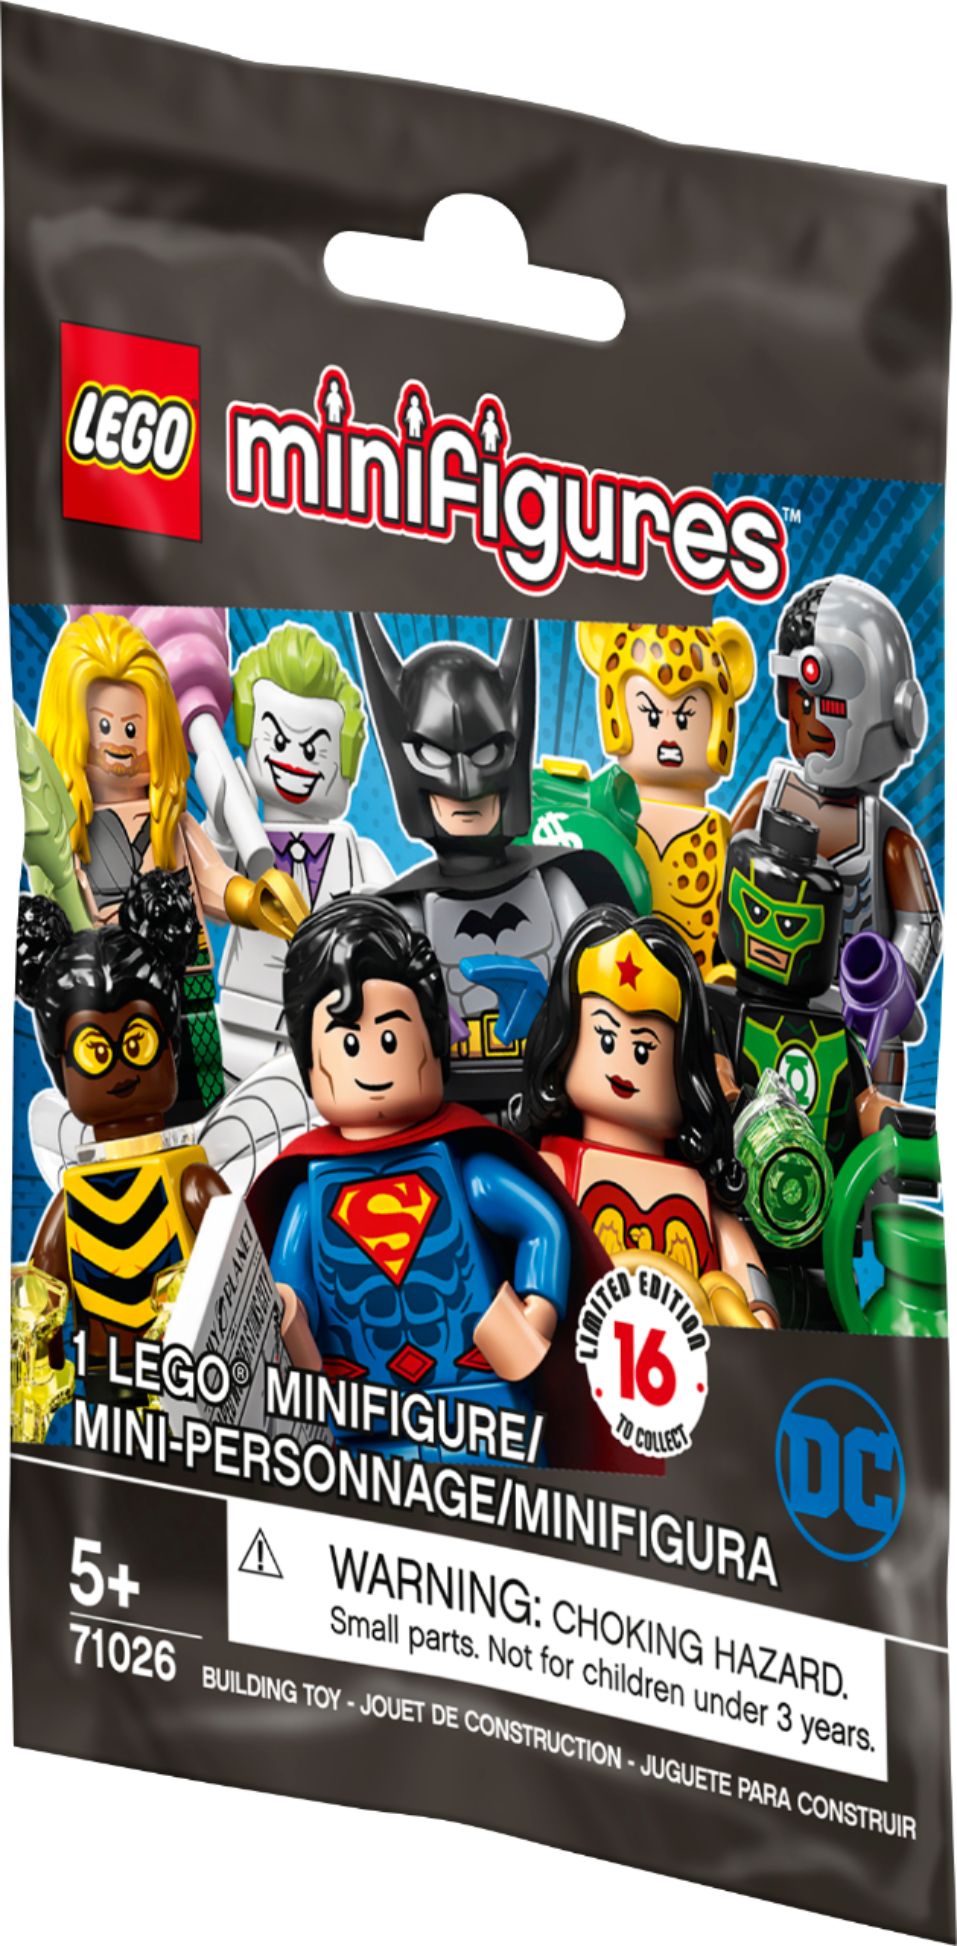 LEGO DC Super Heroes Sealed Box Case of 60 Minifigures 71026 IN STOCK 